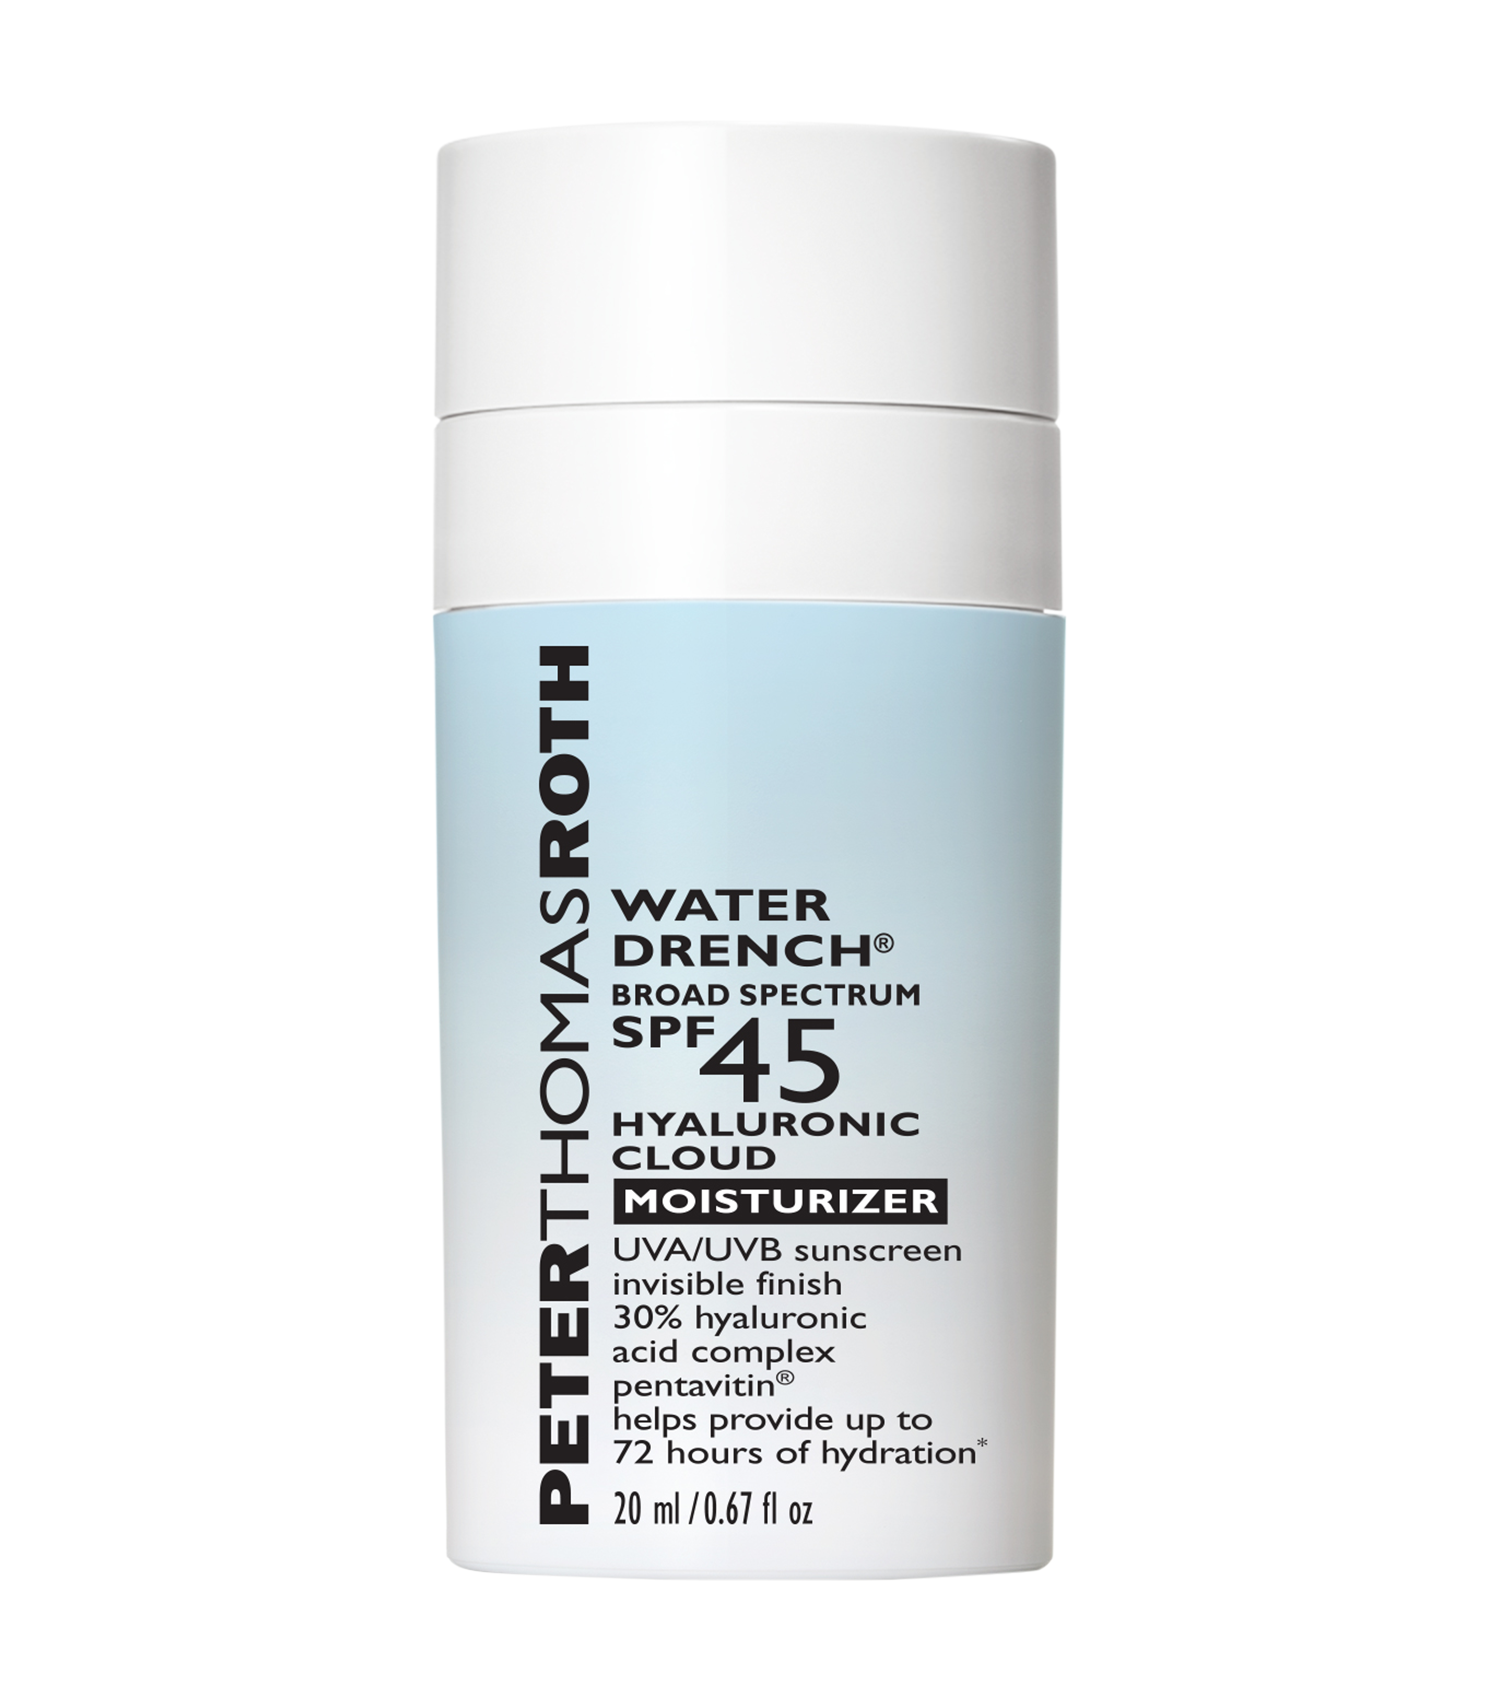 Peter Thomas Roth Travel-Size Water Drench  Broad Spectrum SPF 45 Hyaluronic Cloud Moisturizer Peter Thomas Roth Travel-Size Water Drench  Broad Spectrum SPF 45 Hyaluronic Cloud Moisturizer 1